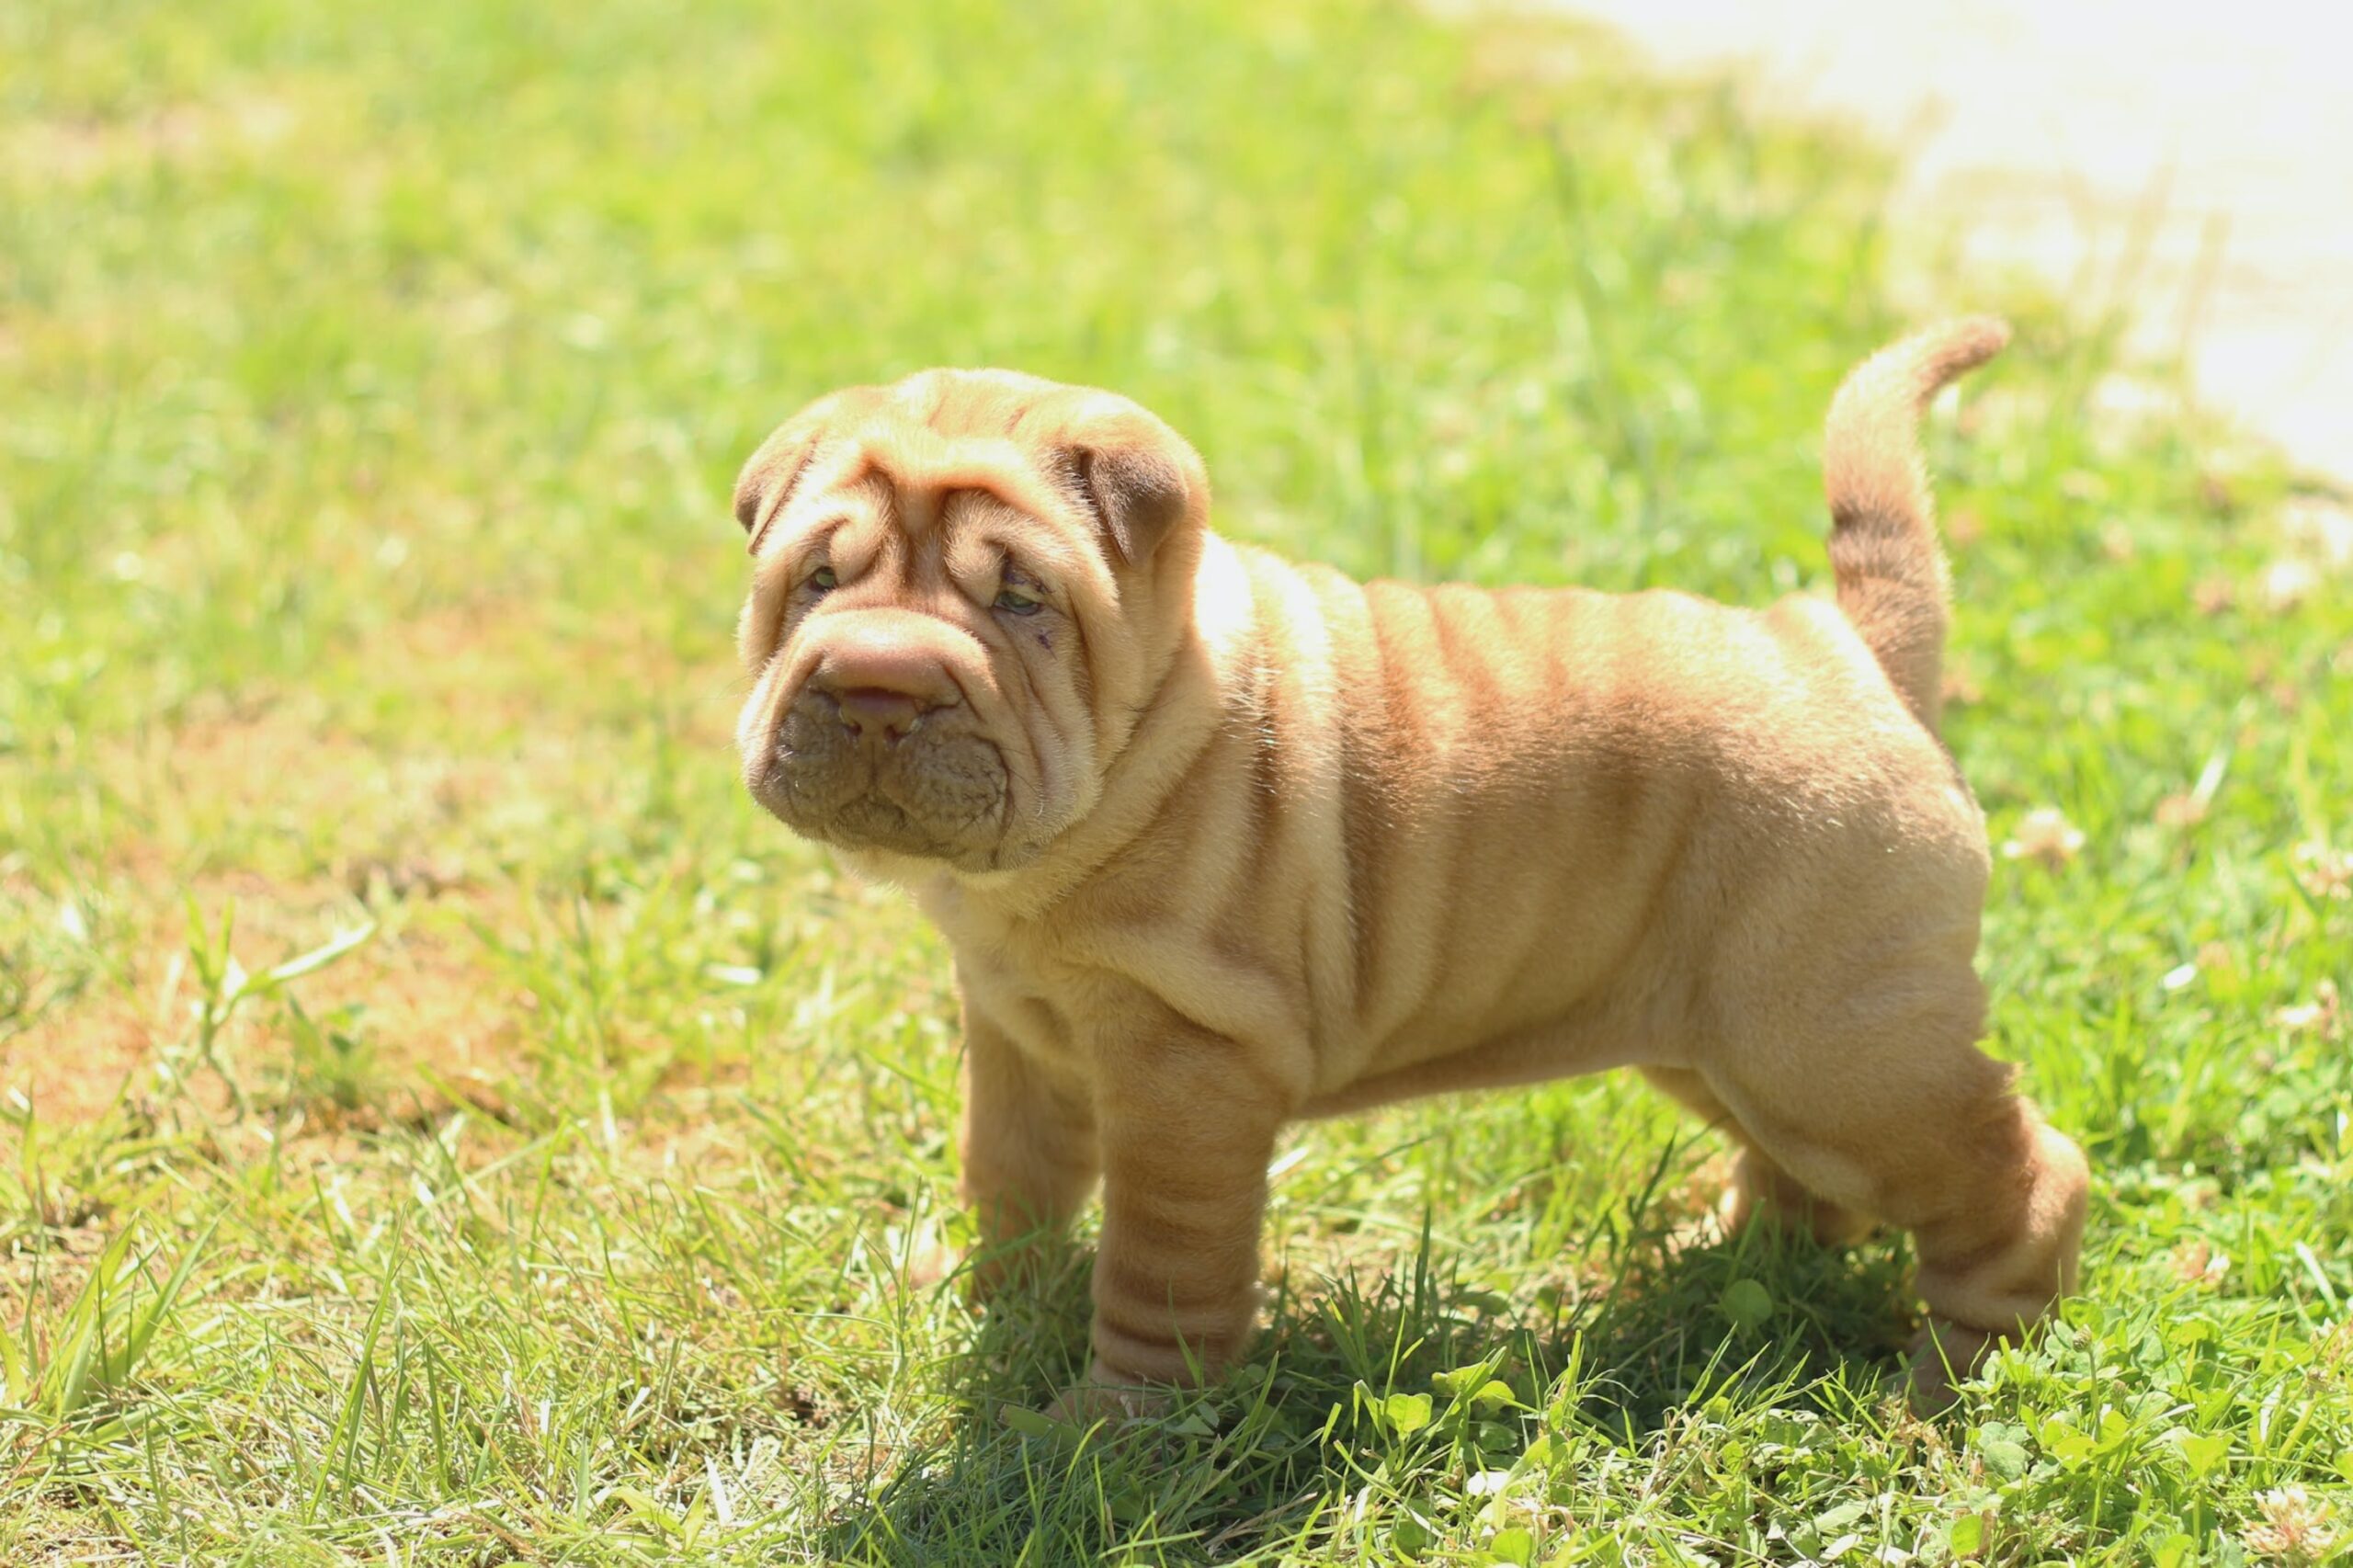 Know the Signs: 5 Most Common Health Issues in Shar Peis